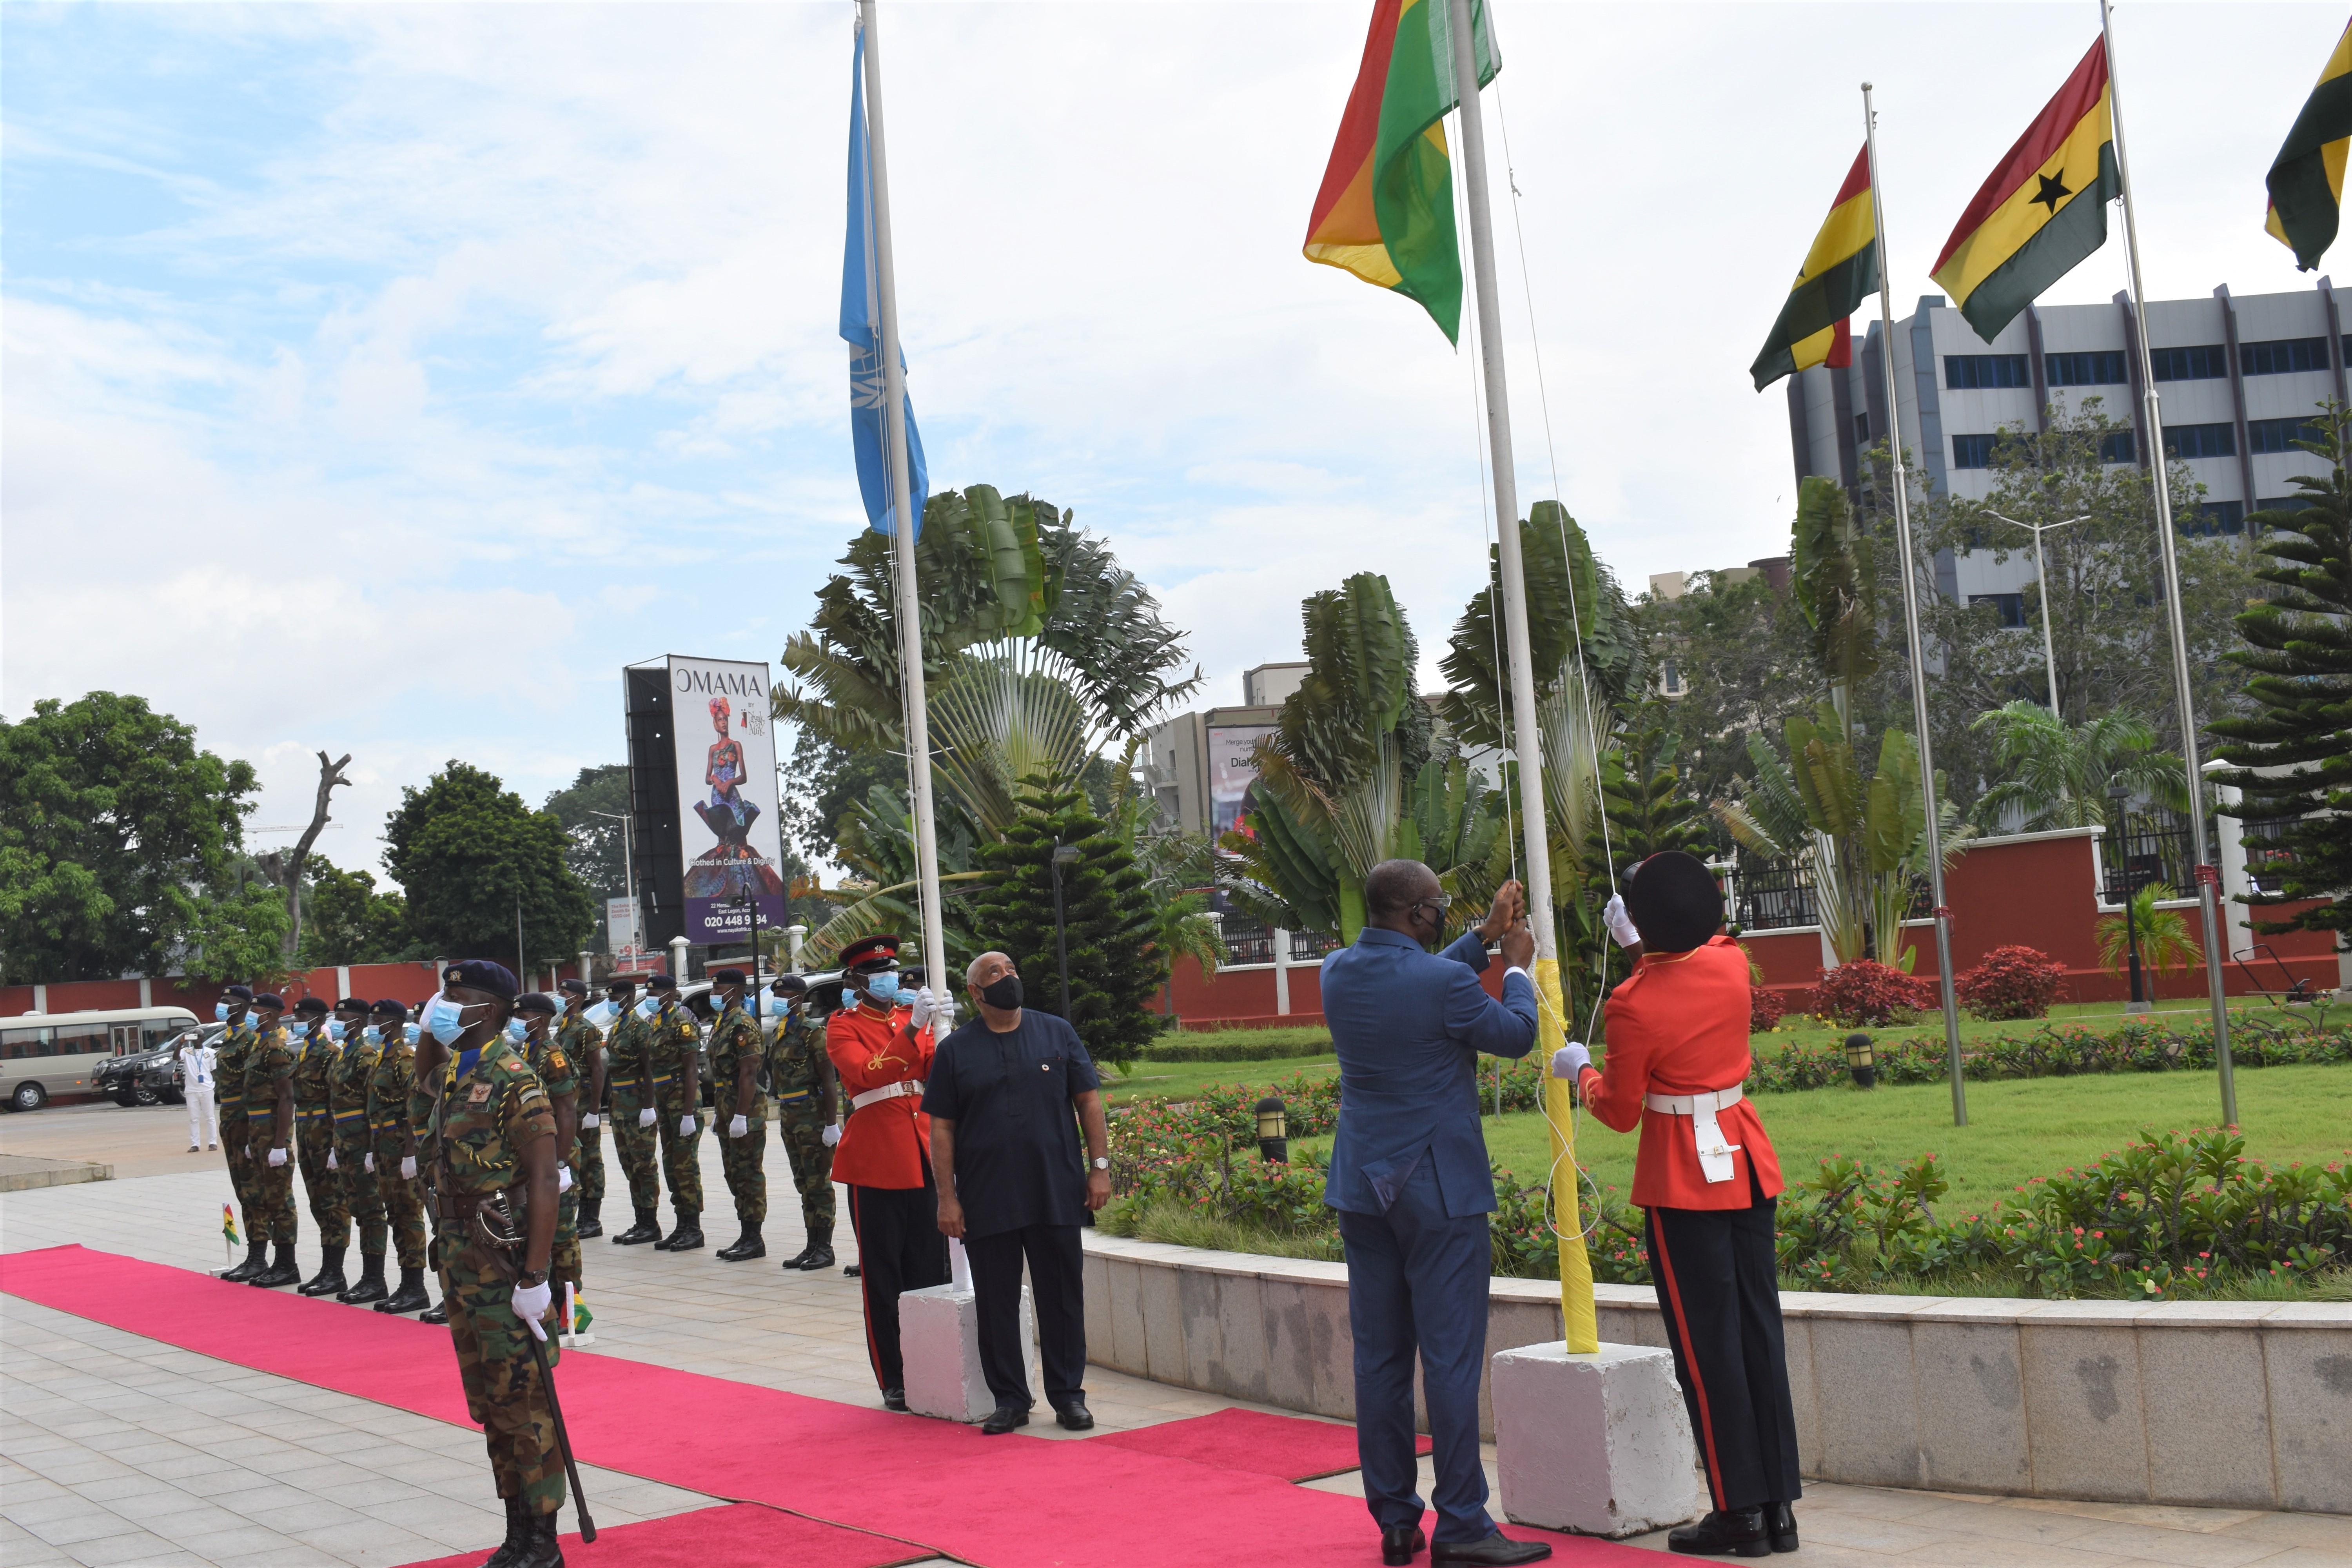 76th UN Day Observed in Accra with a Flag-raising Ceremony